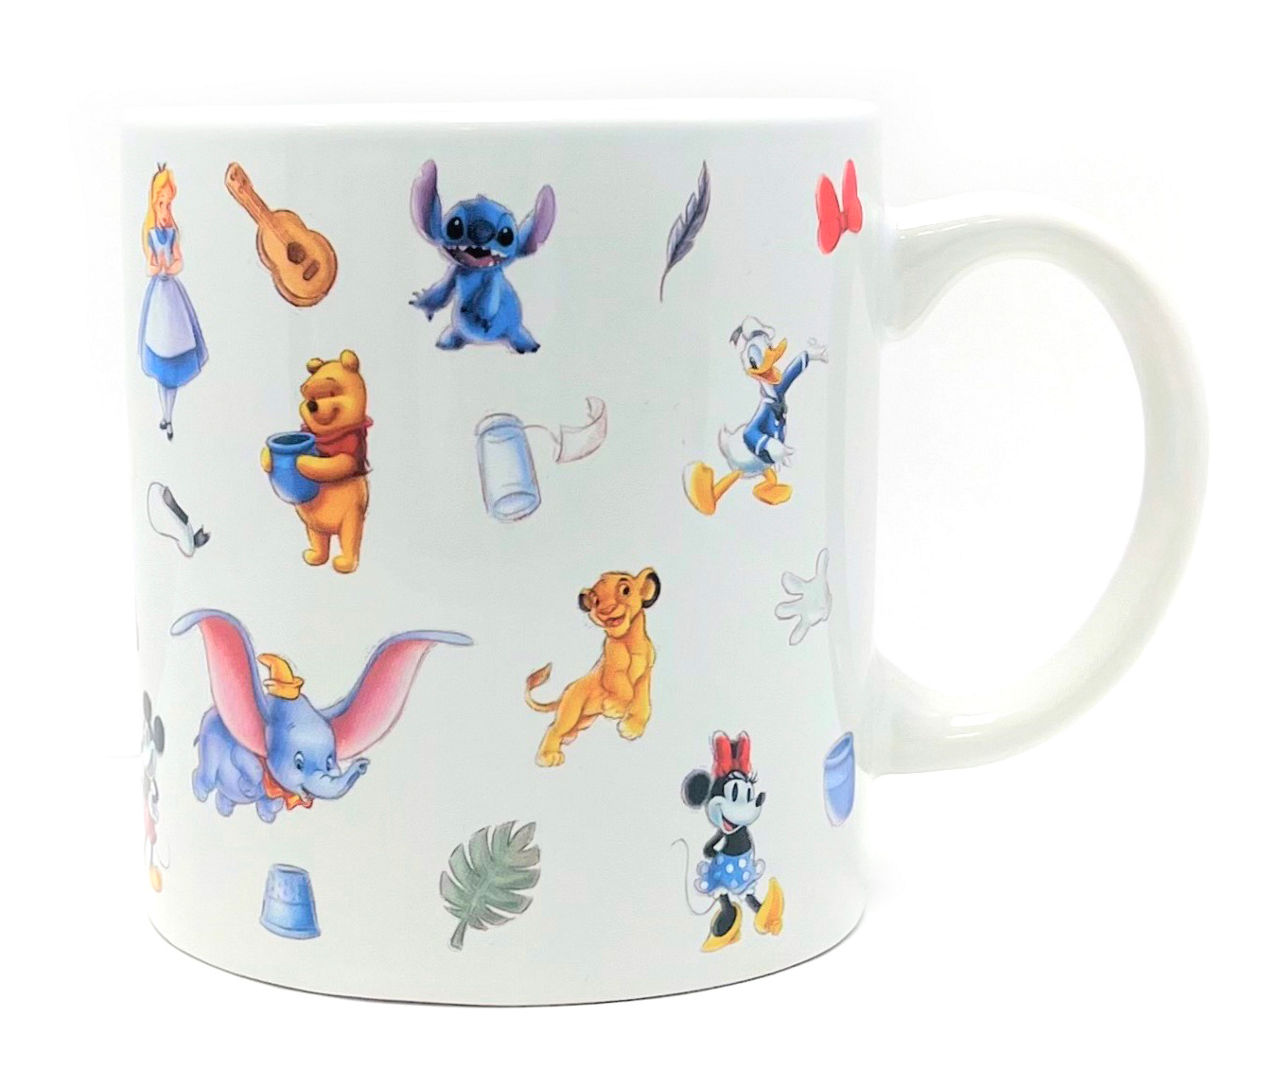 Disney Store: Kids' Character Cups Only $2.99 (Regularly $8) & More Deals